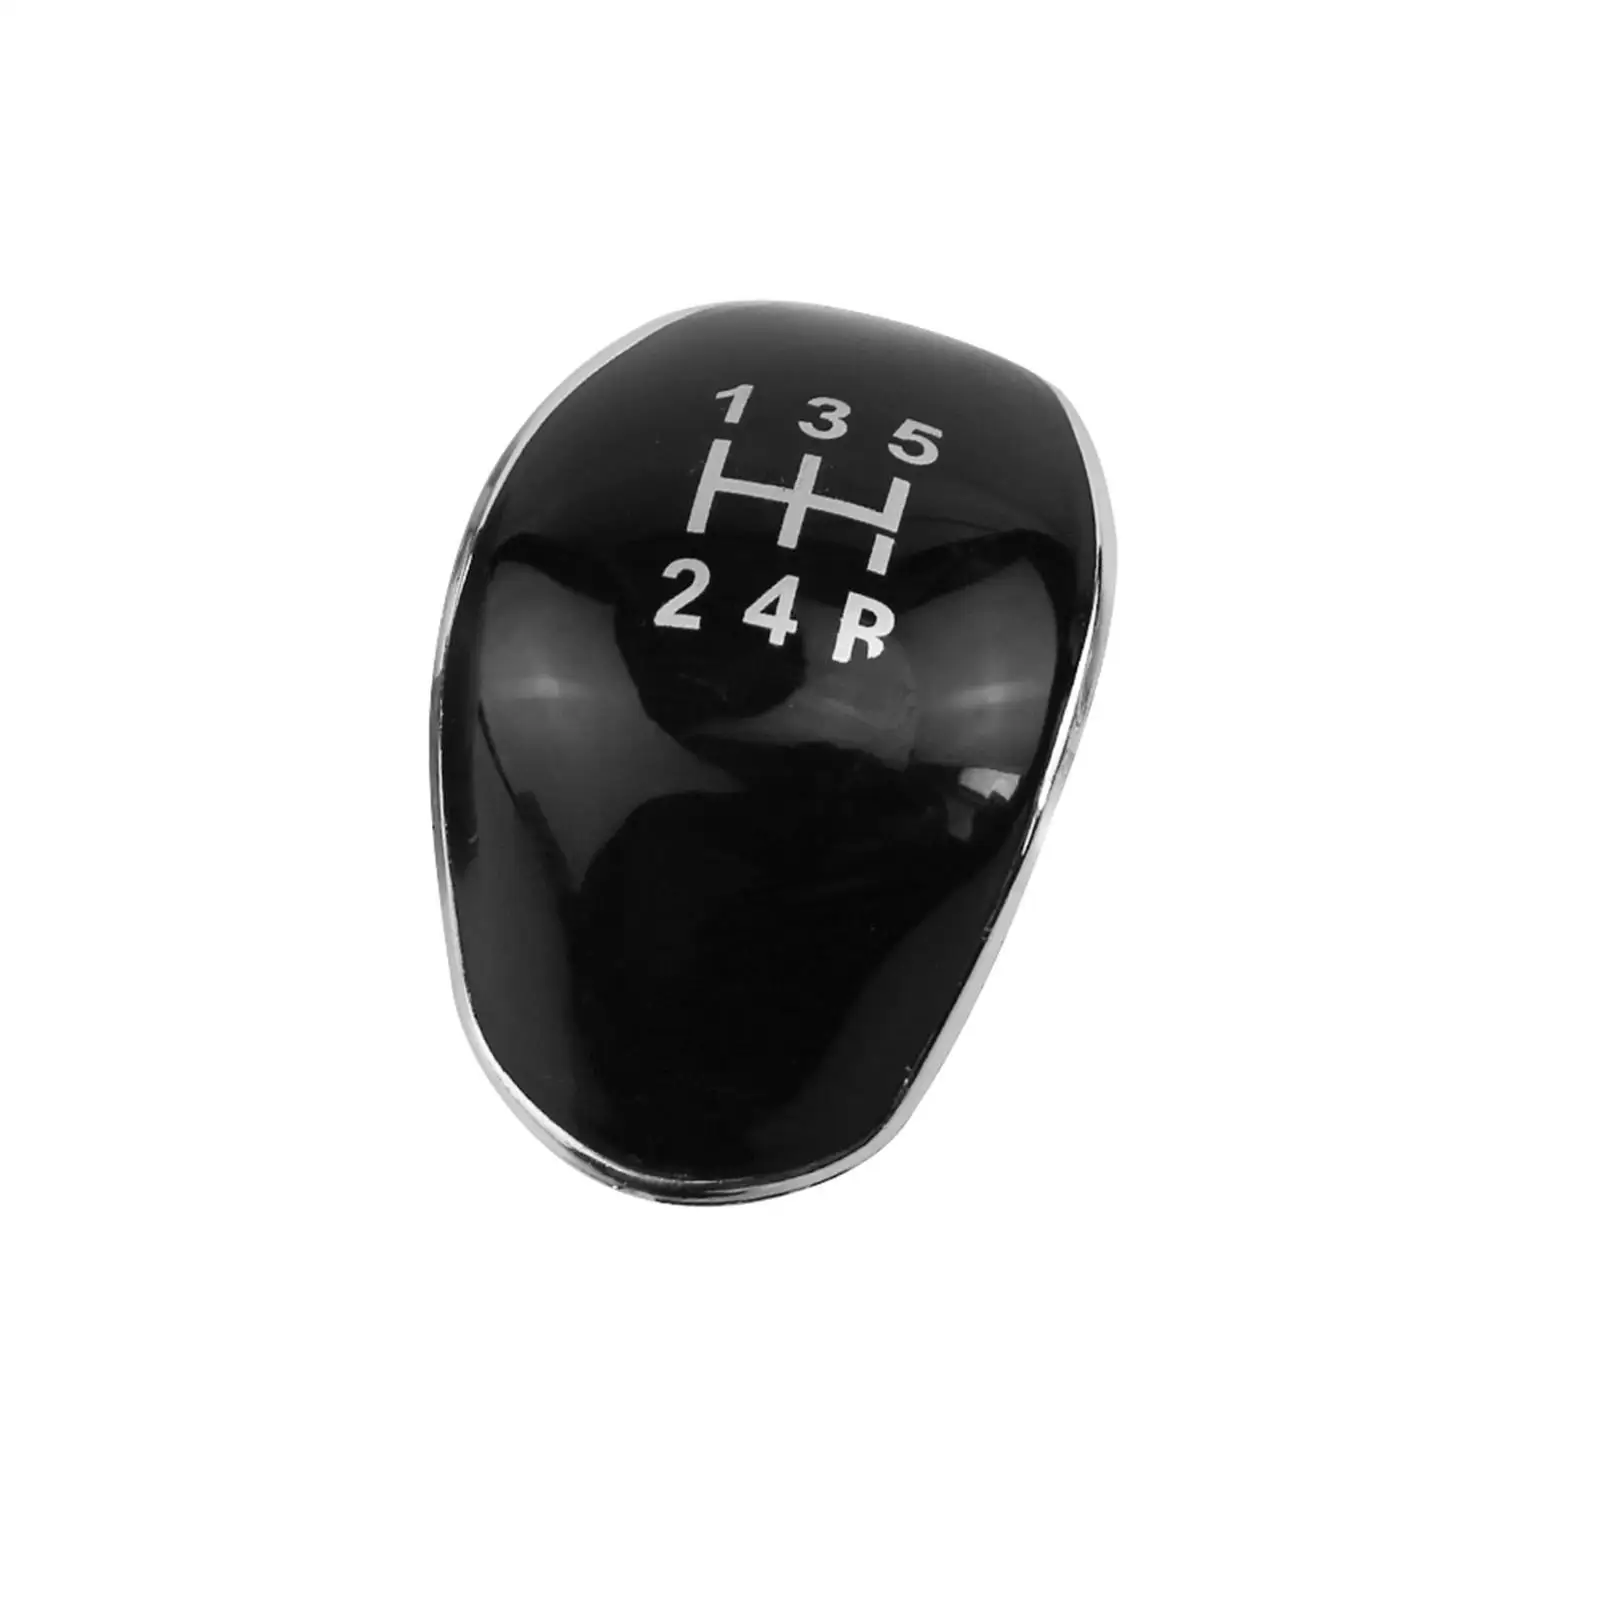 Automotive 5 Speed Gear Shift Knob Cap Cover Insert Manual for Ford Focus Fiesta Accessories High Quality